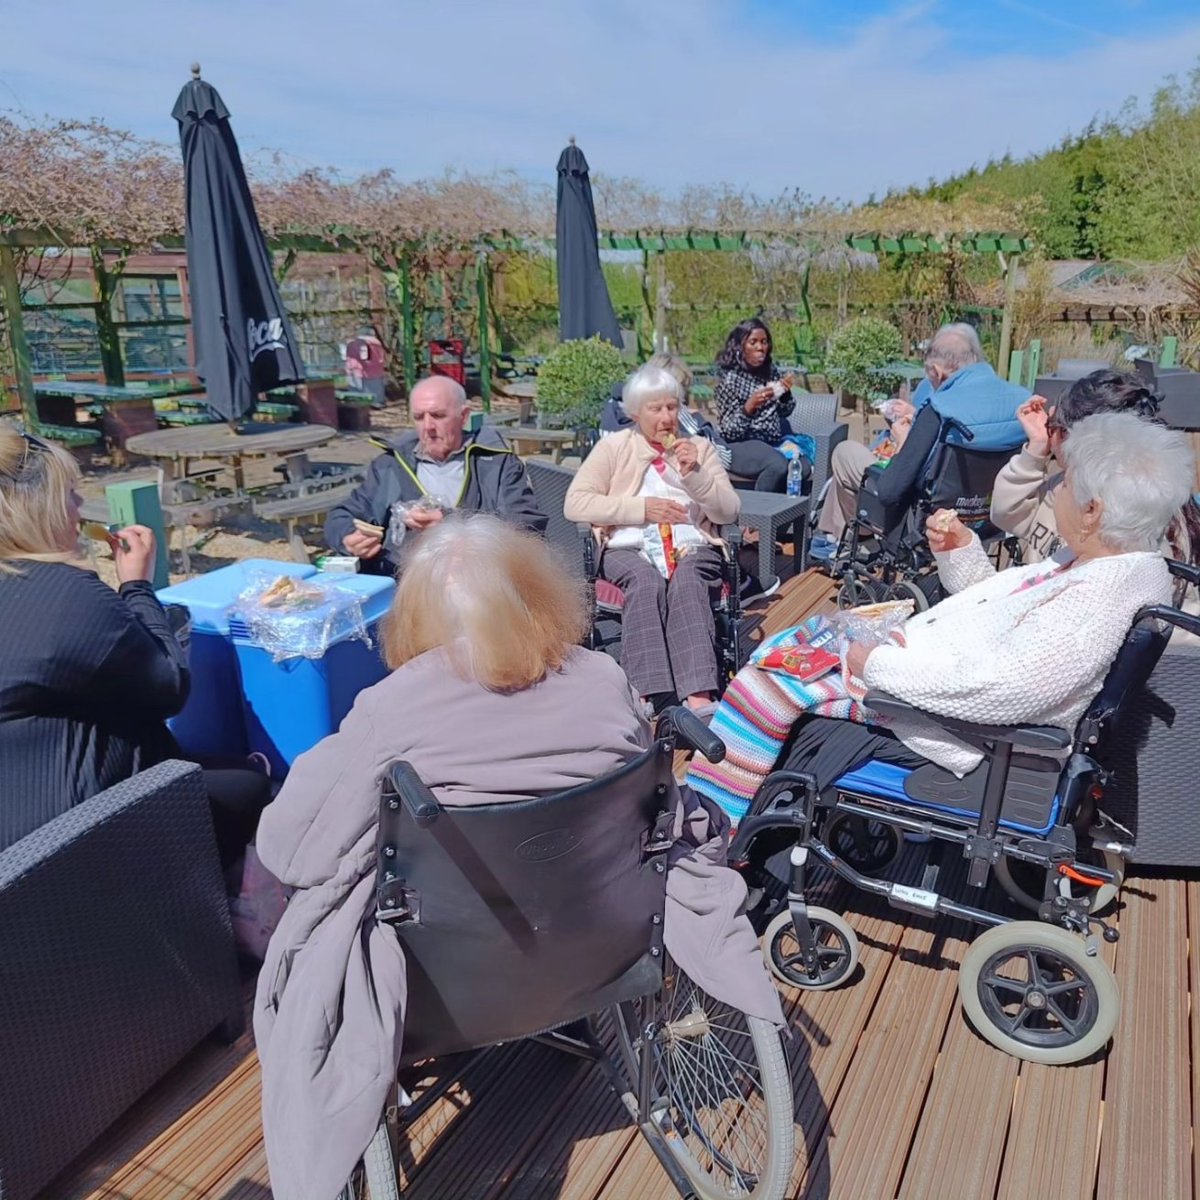 🐒 Solent Grange Nursing Home's outing to Monkey Haven was delightful! @MonkeyIOW

Poppy Floor residents enjoyed snacks and souvenirs, while Sunflower Floor residents had packed lunches and treats. 

#SeniorOuting #DementiaCare #ResidentialCare #CareHomeTrips